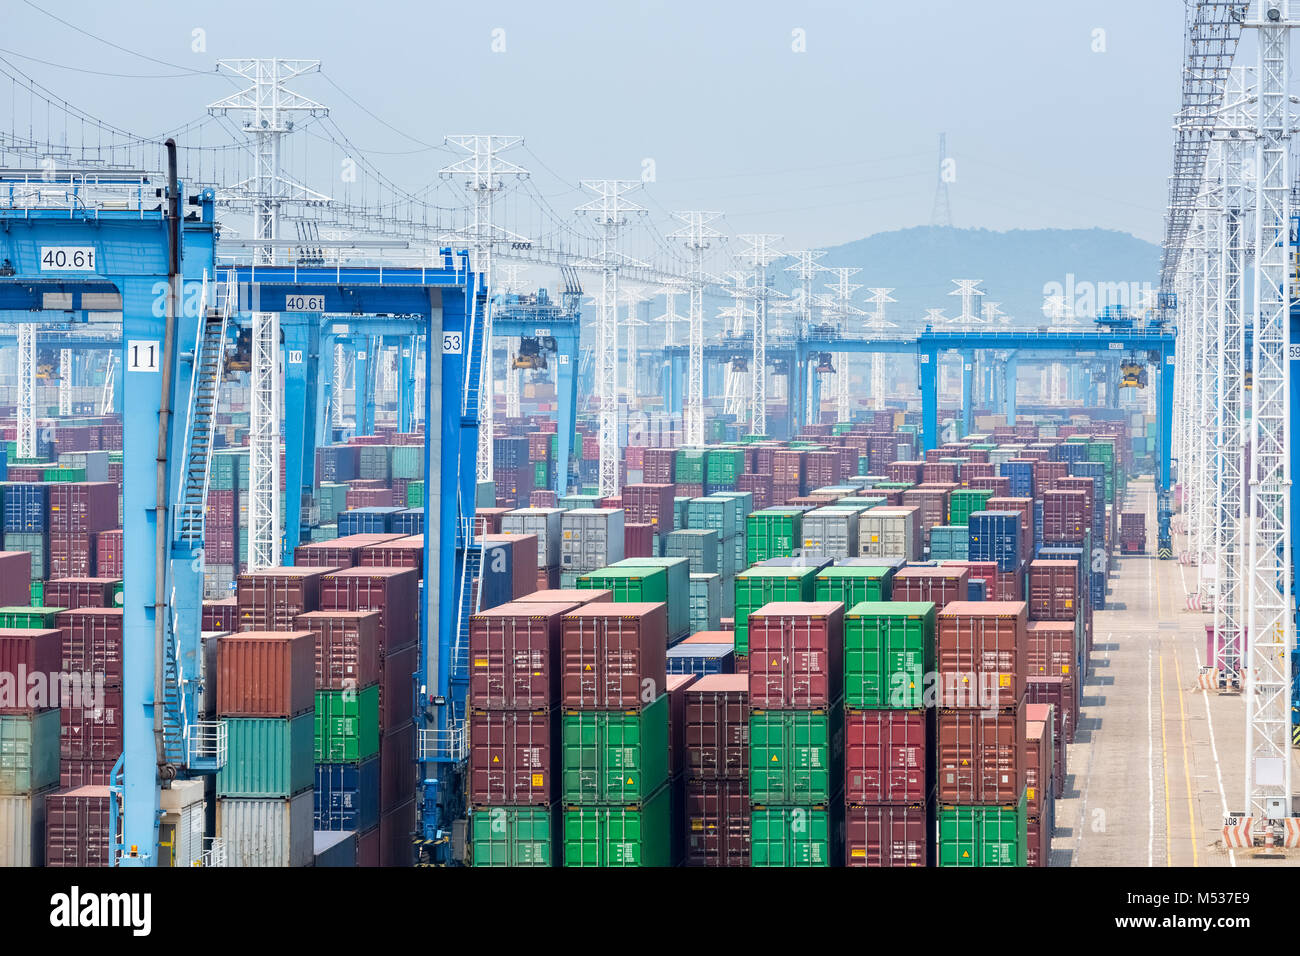 container stack yards Stock Photo